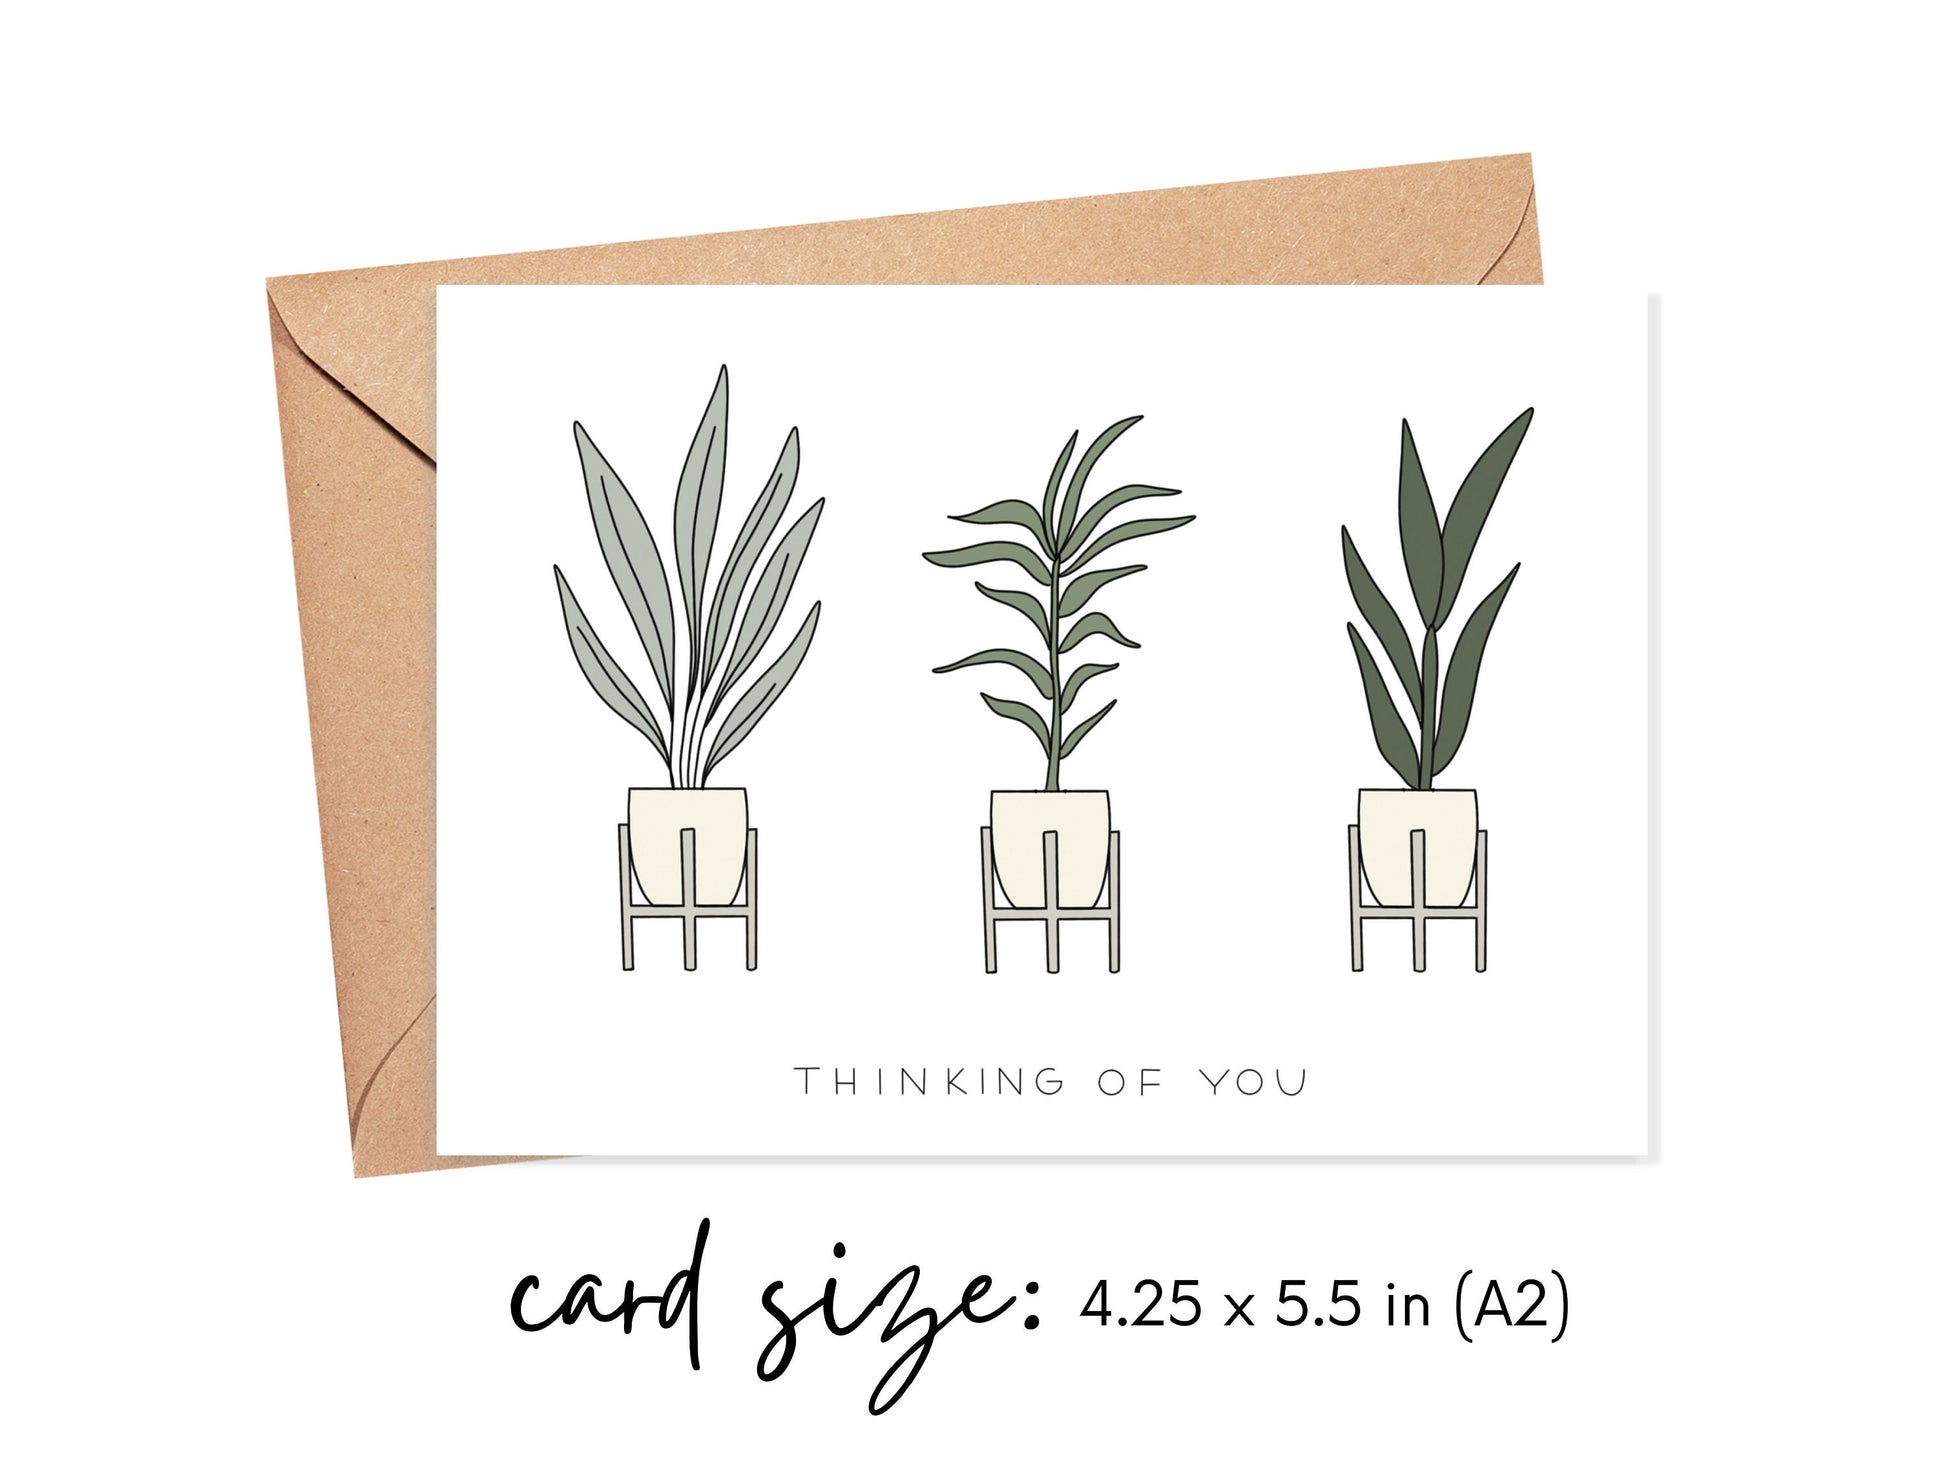 Thinking of You Planters Card Simply Happy Cards